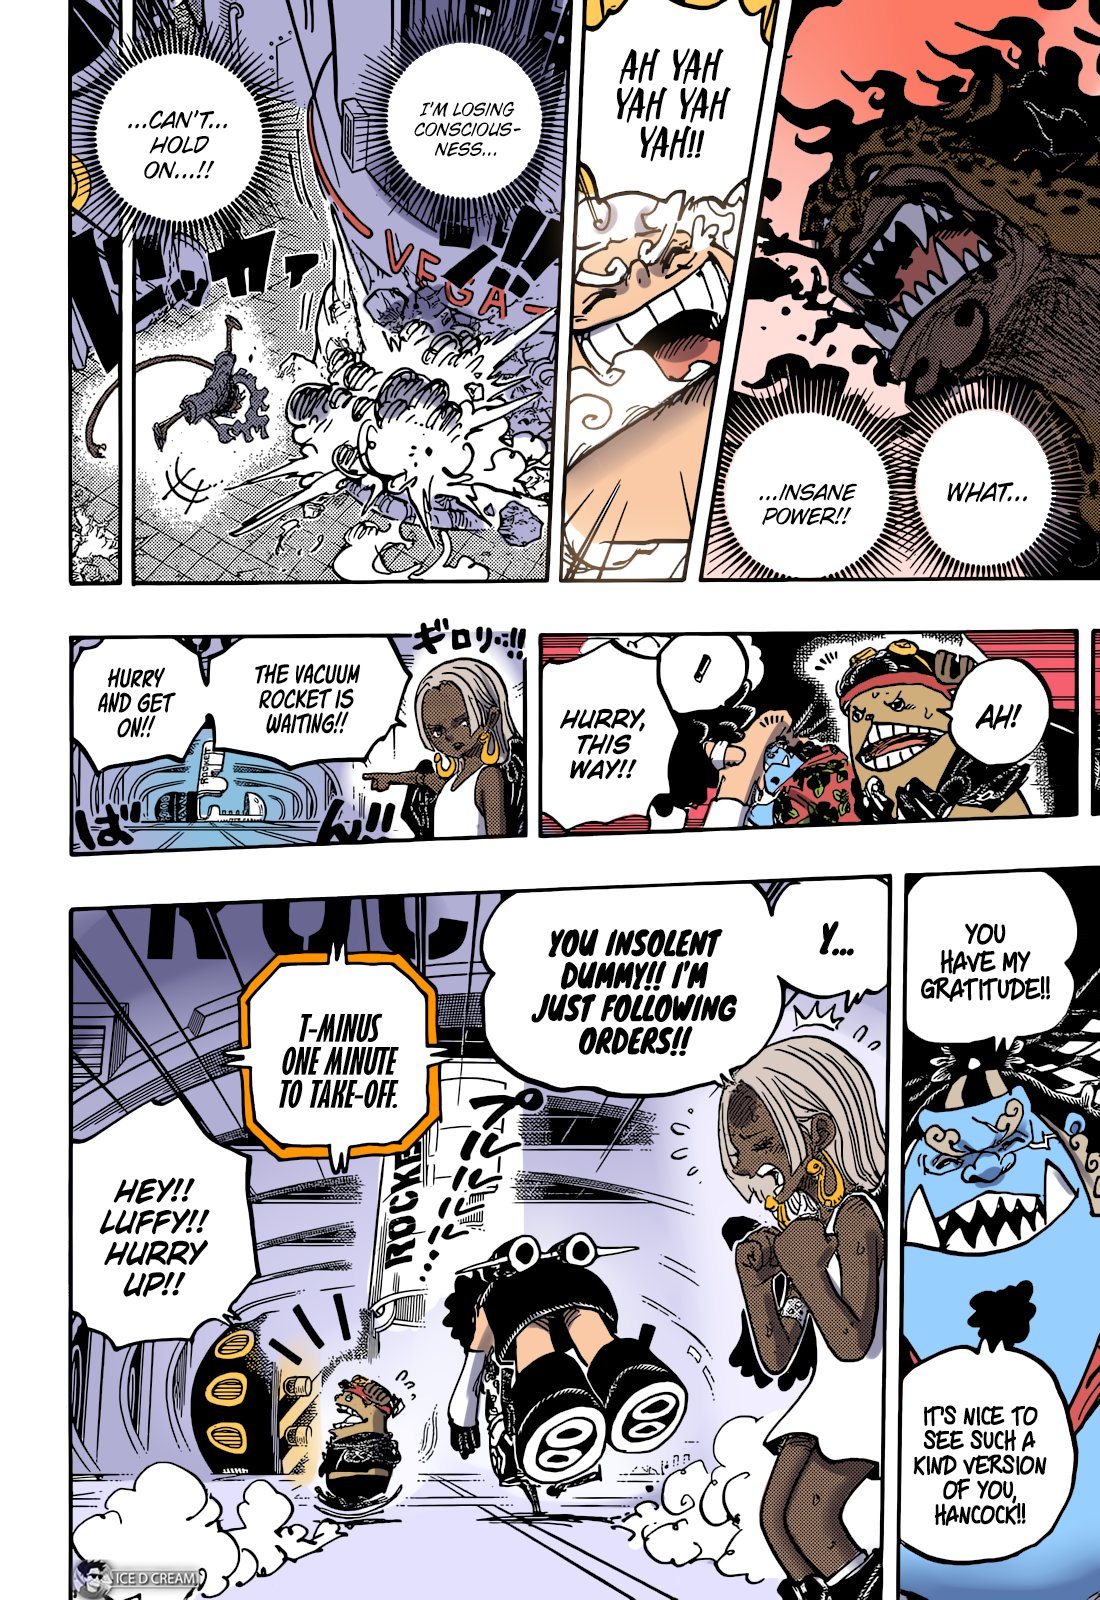 One Piece Chapter 1070 The Most Powerful Beings Colored Full